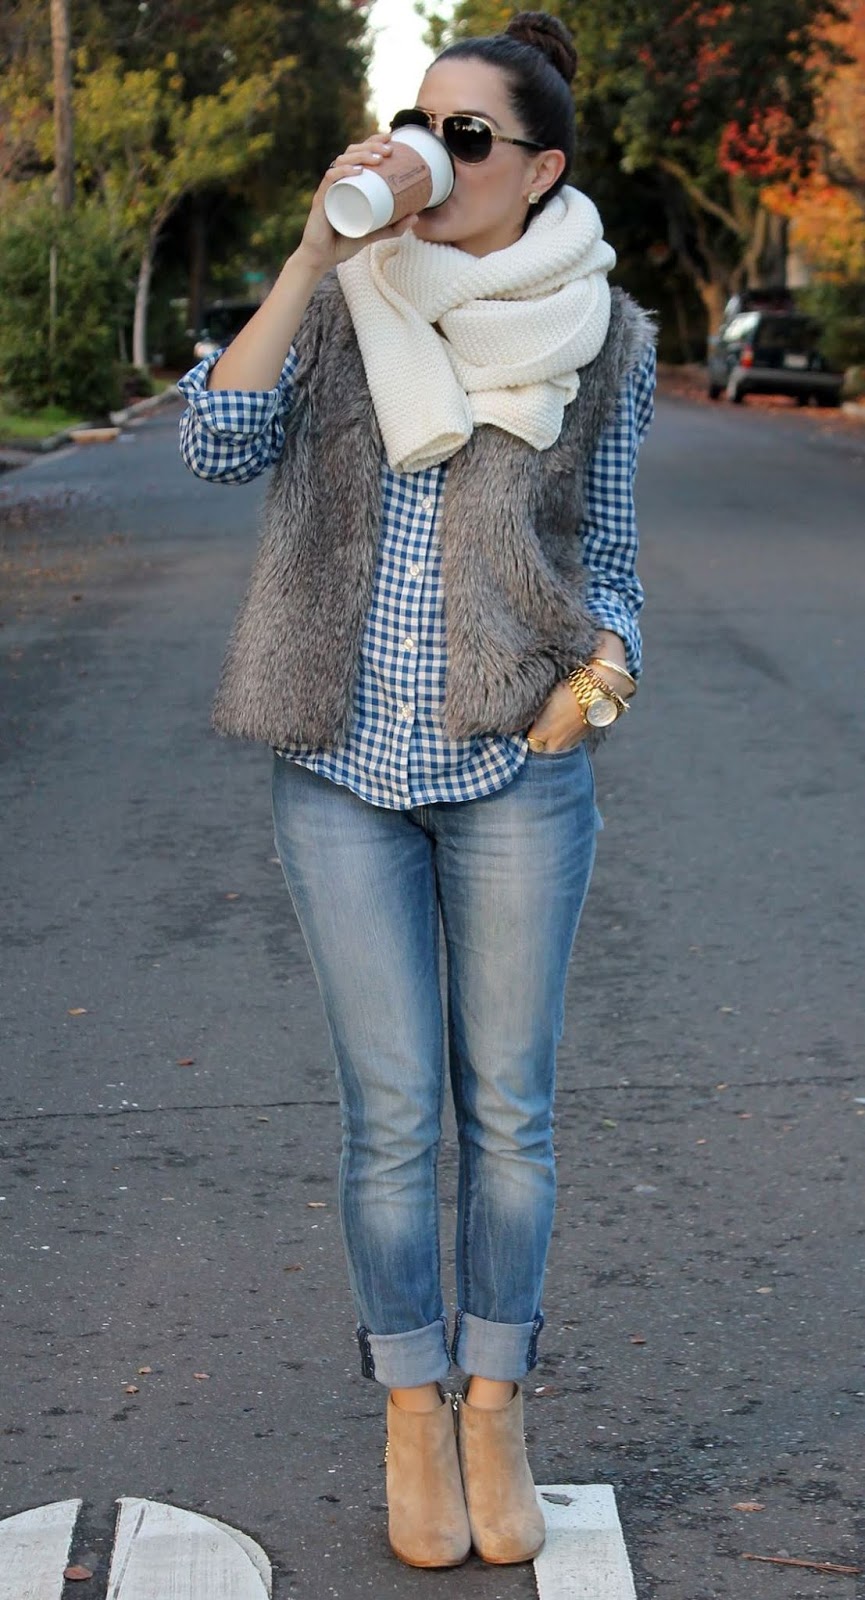 how to style a fur vest : white scarf + plaid shirt + skinny jeans + boots